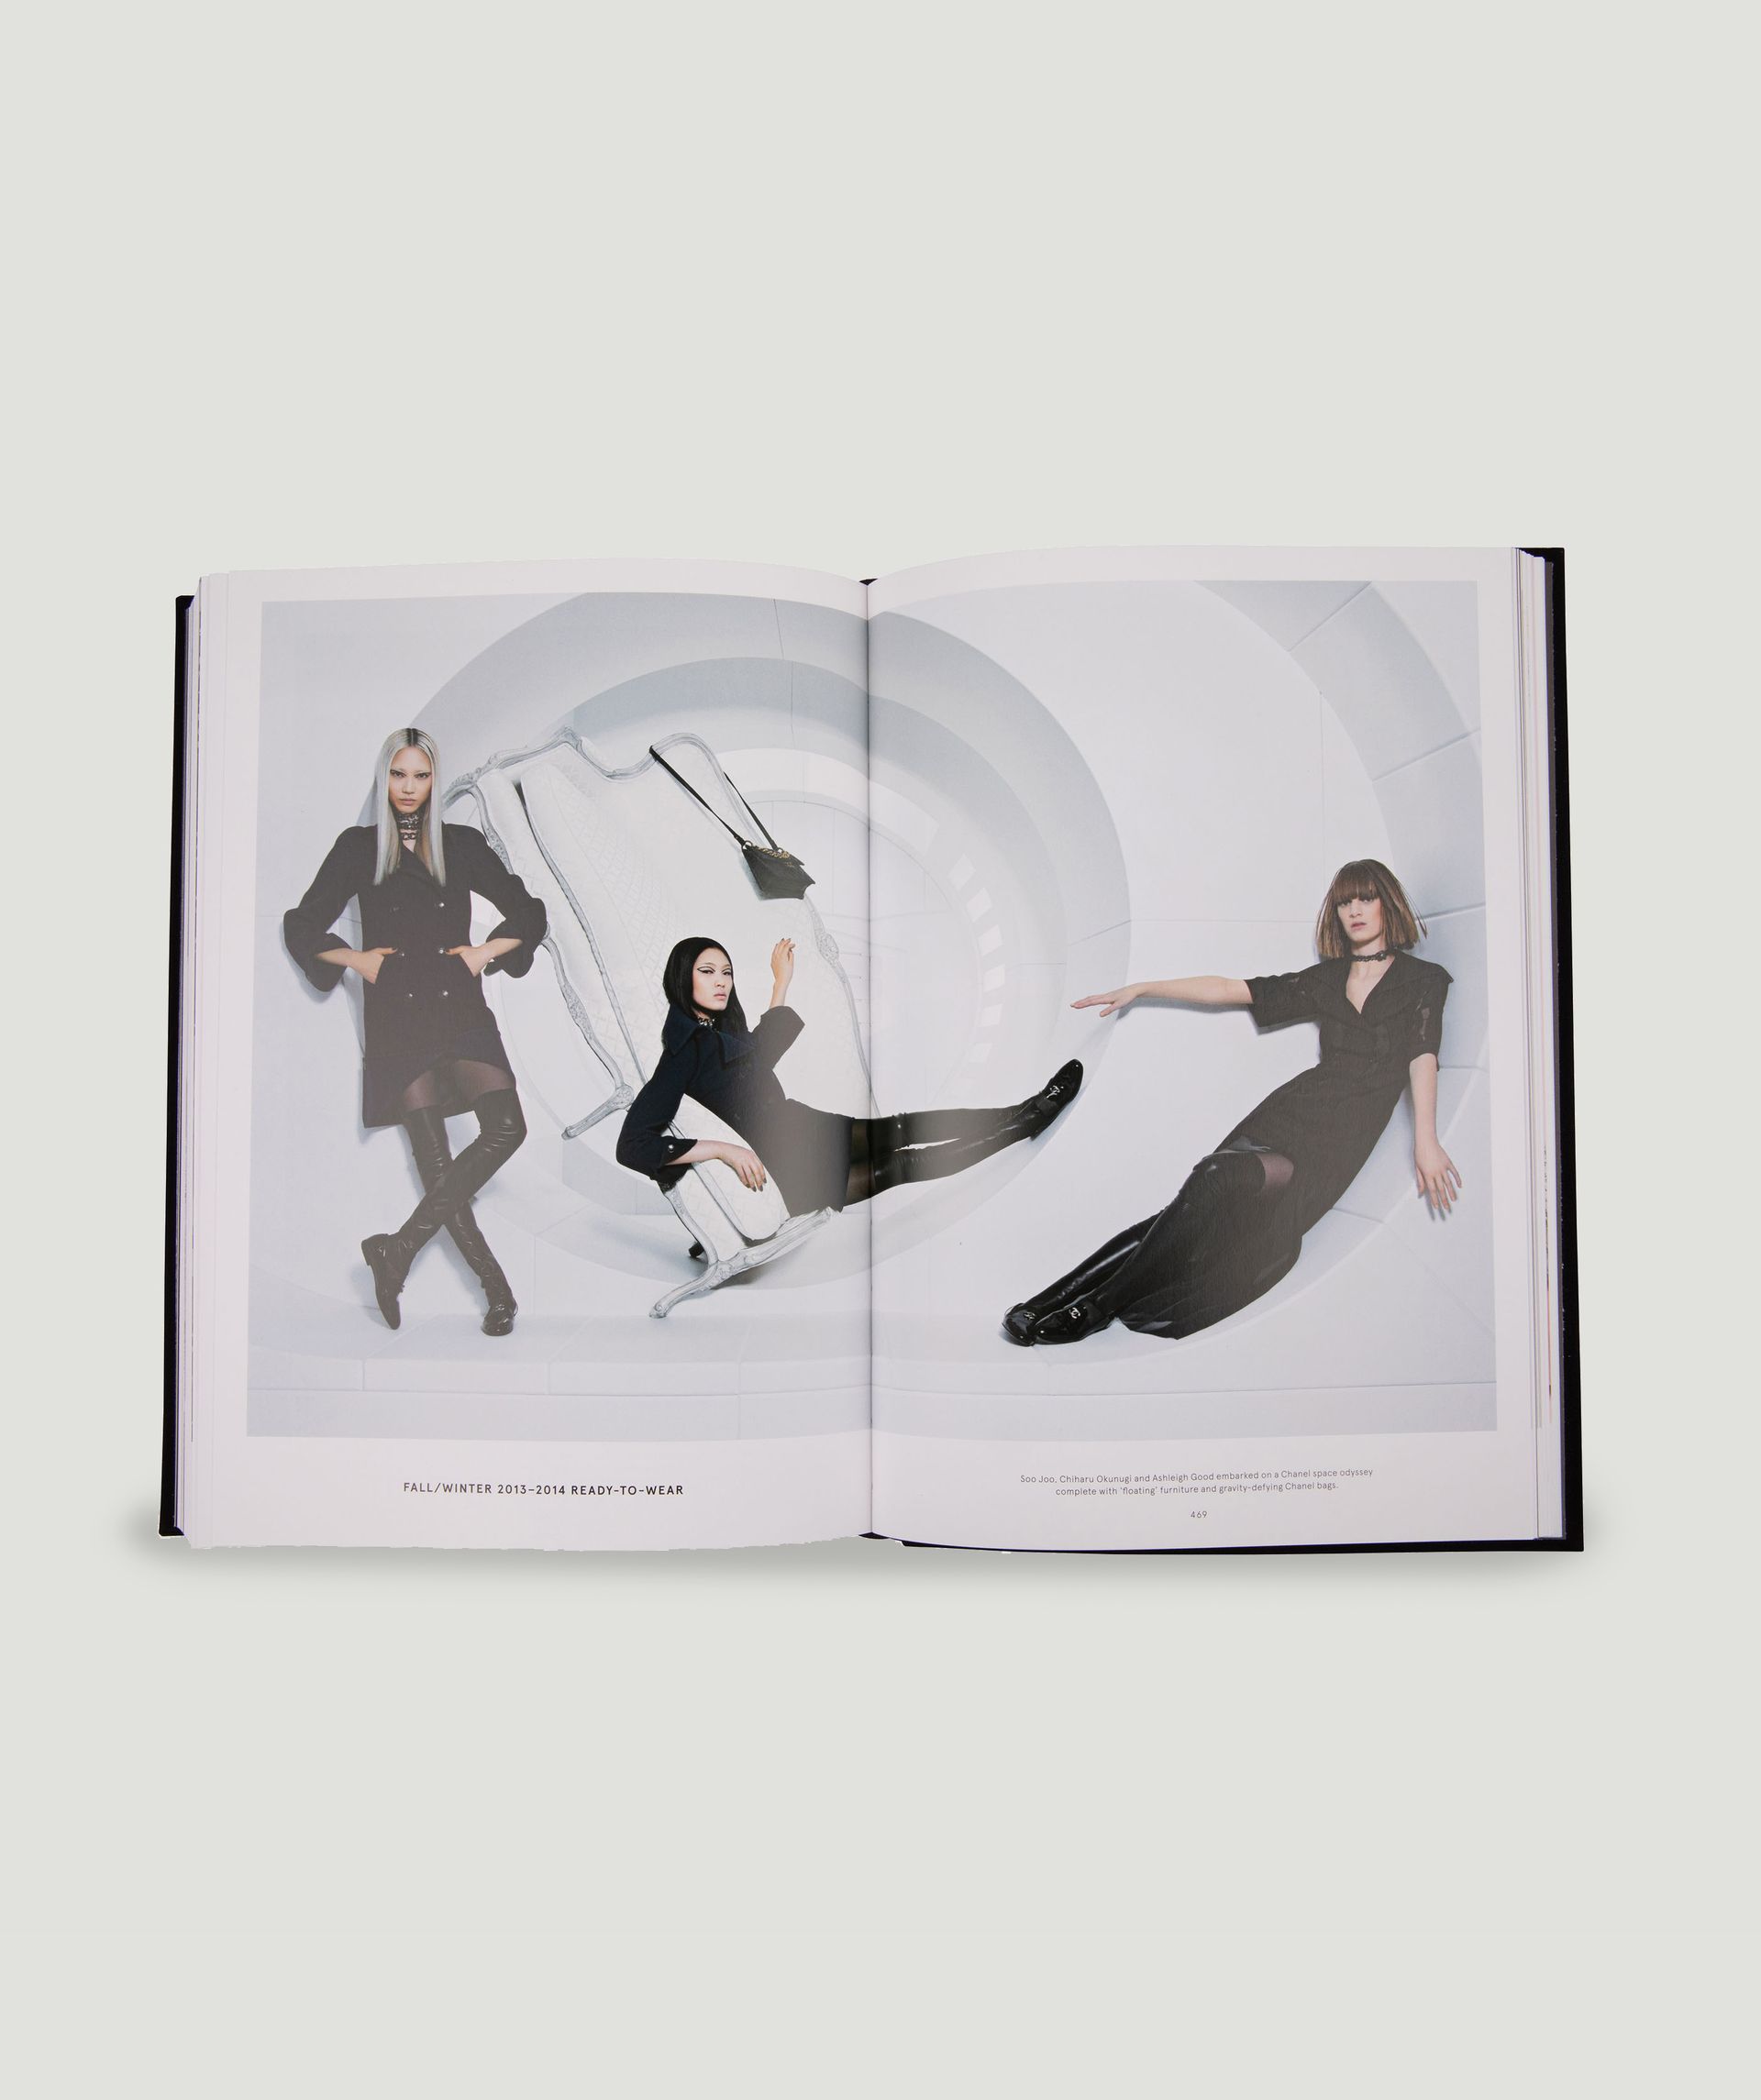 CHANEL The Karl Lagerfeld Campaigns Tischbuch  